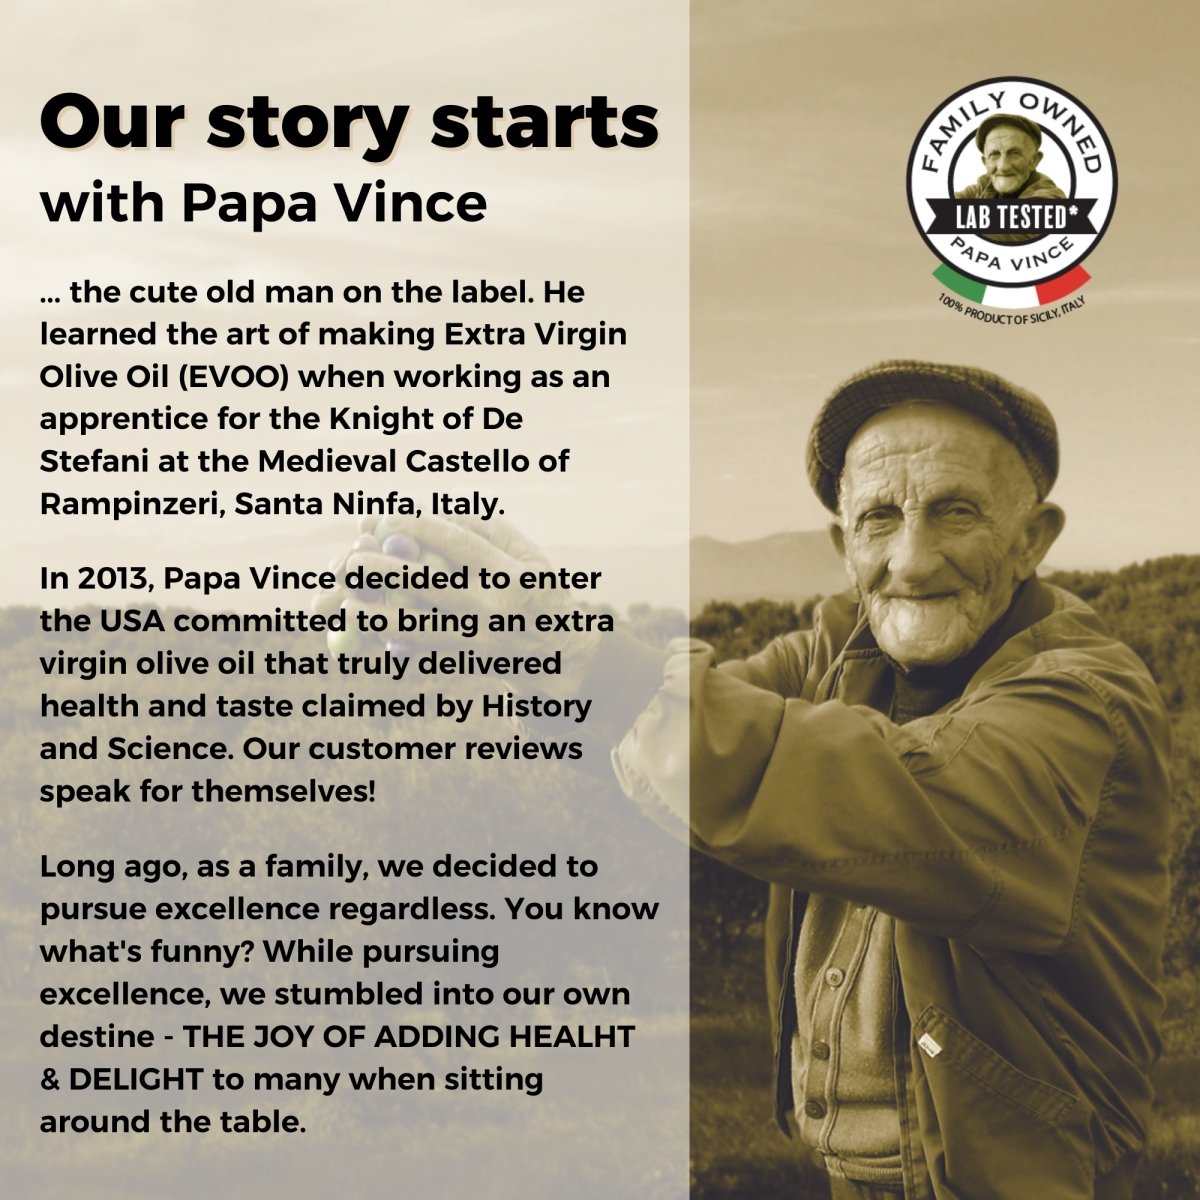 Balsamic Vinegar Red Wine Moscato - Clean Food, with hints of Figs, Raspberry & Homemade Wine aged 8-years in Oak & Chestnut wood in small batches by our family from Sicily, Italy | 16.91 fl oz - Papa Vince - Papa Vince